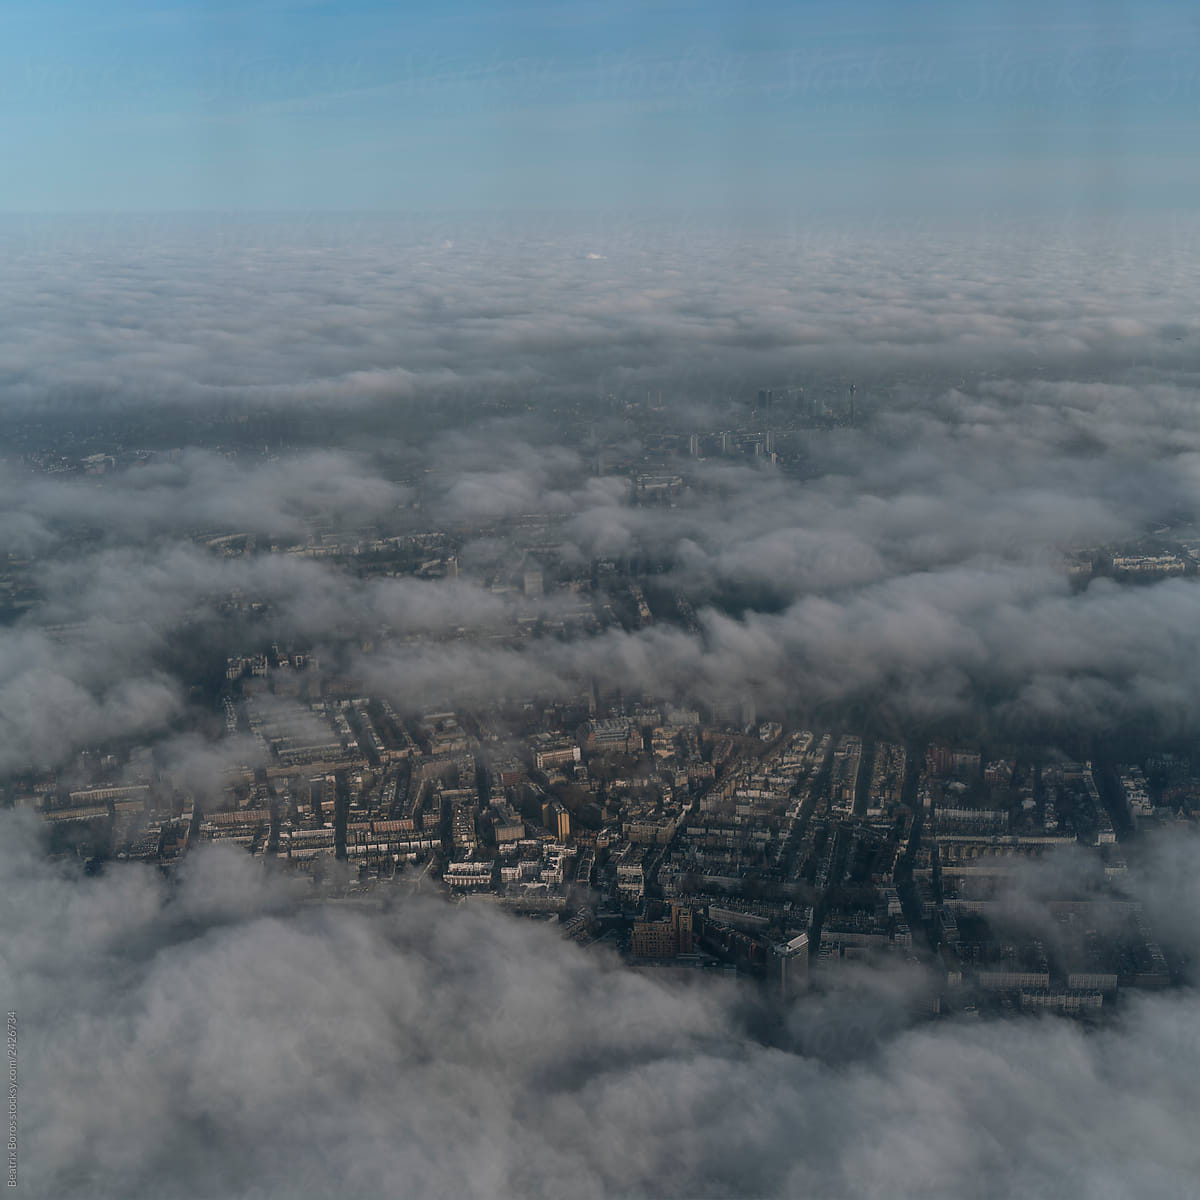 A small part of the city of London from the air